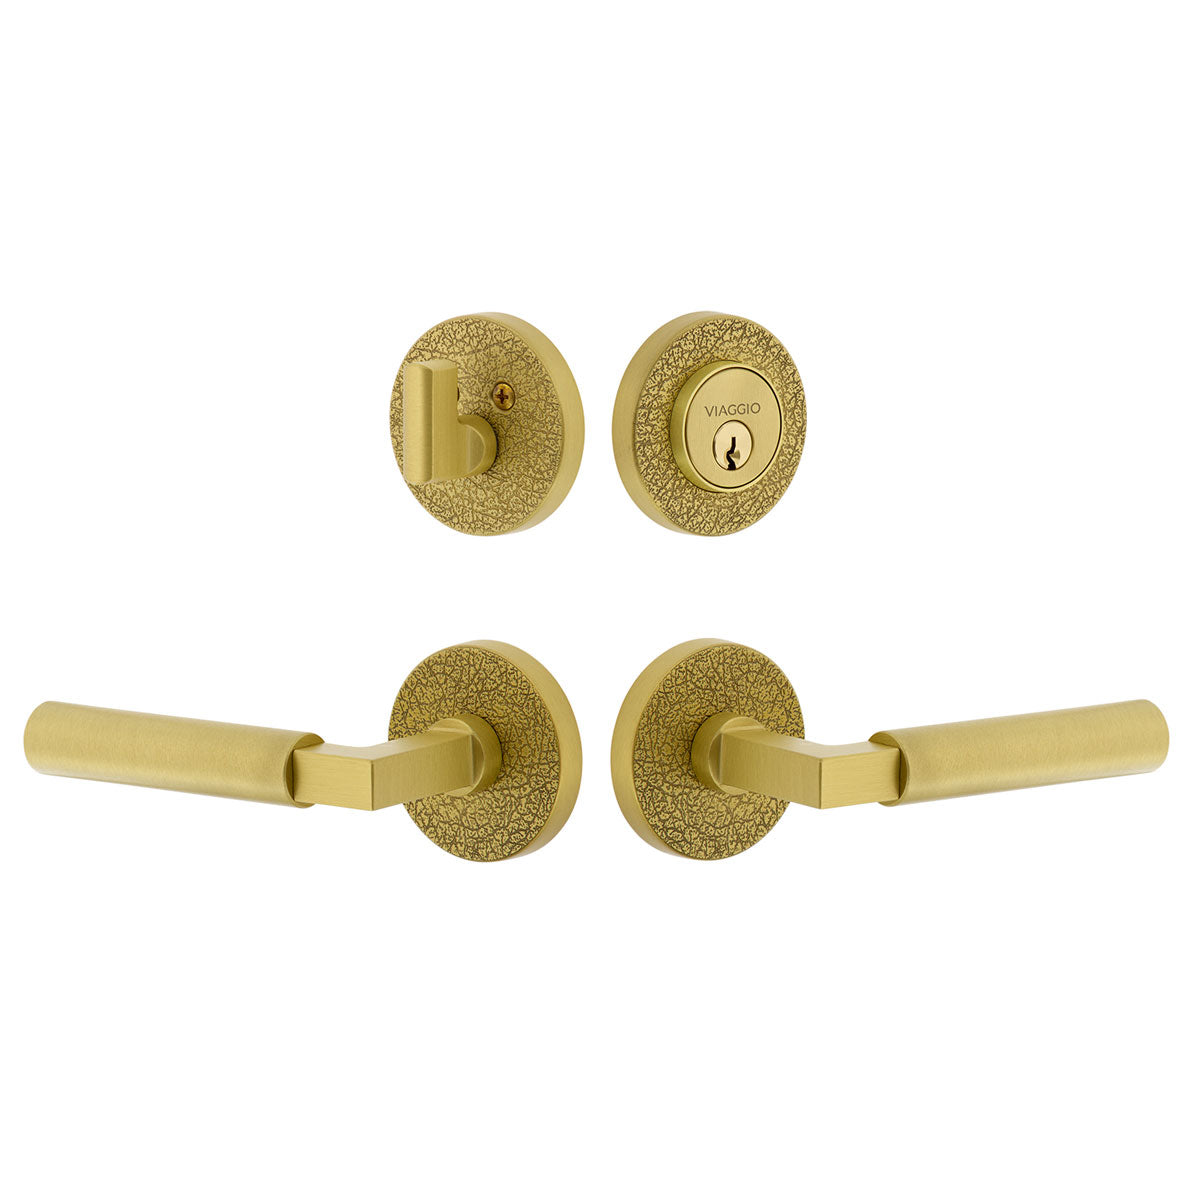 Circolo Leather Rosette Entry Set with Contempo Lever in Satin Brass